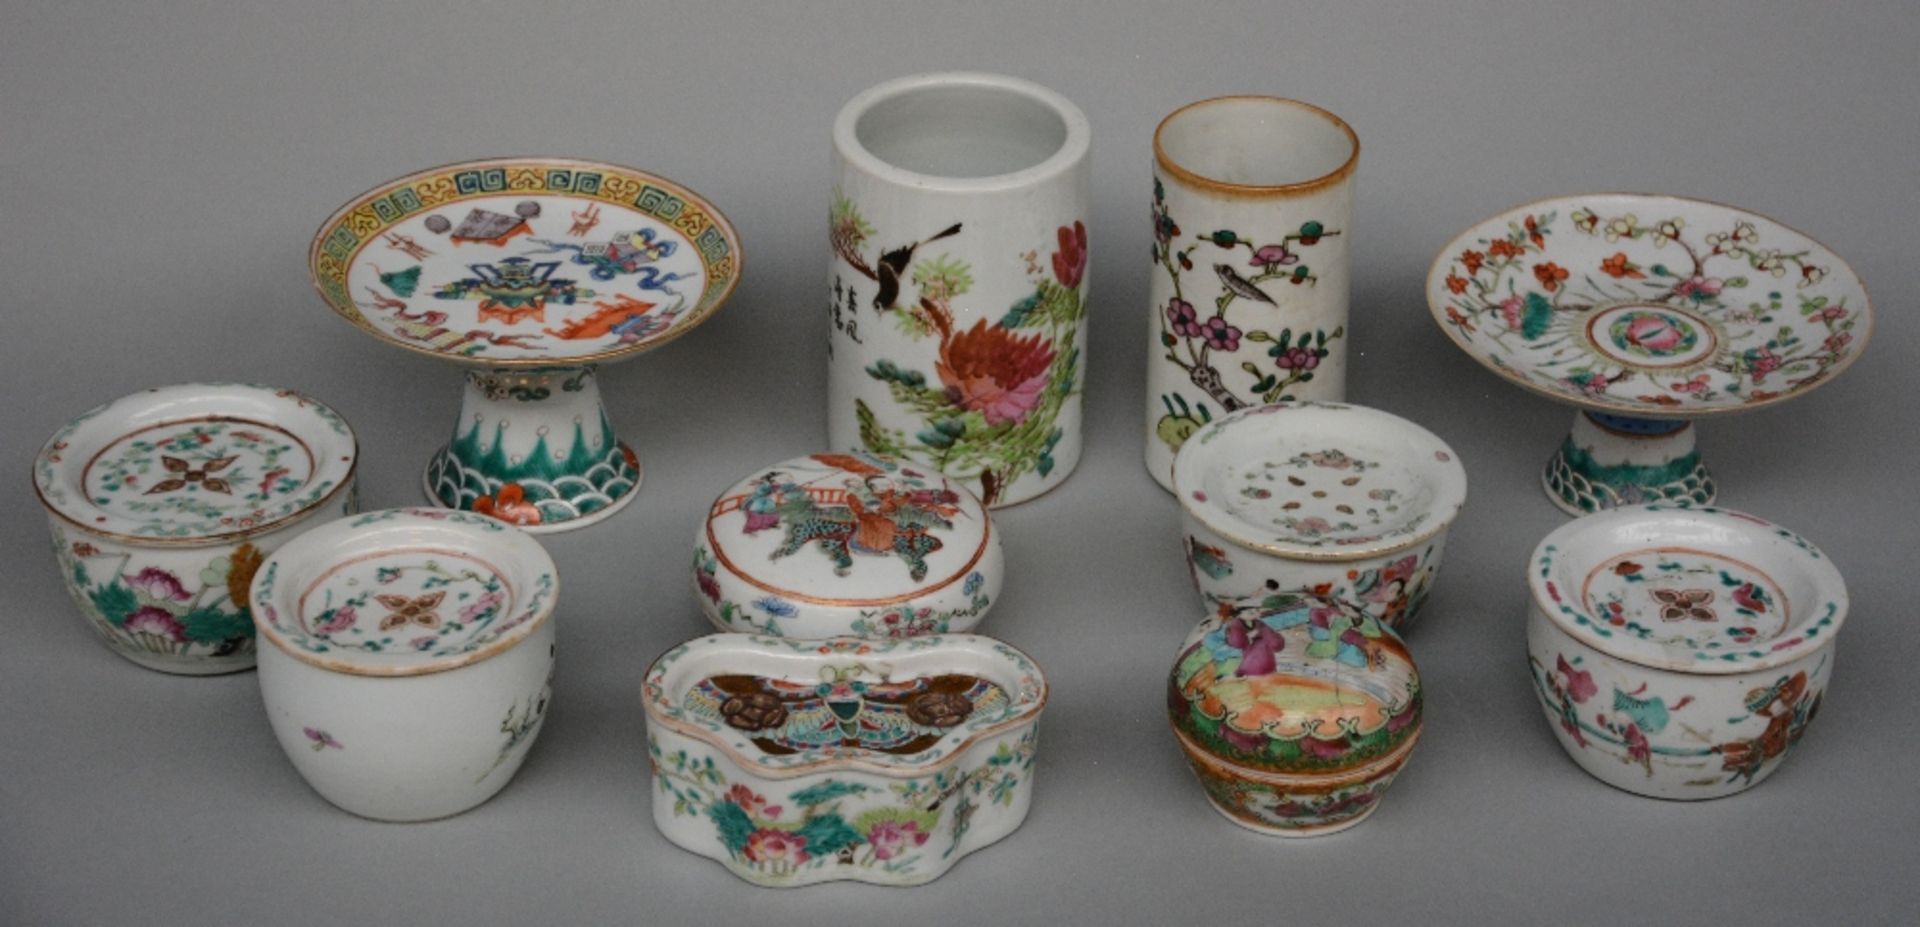 Various Chinese polychrome decorated bowls with cover, plates and brush pots, ca. 1900, H 4,5 > 12